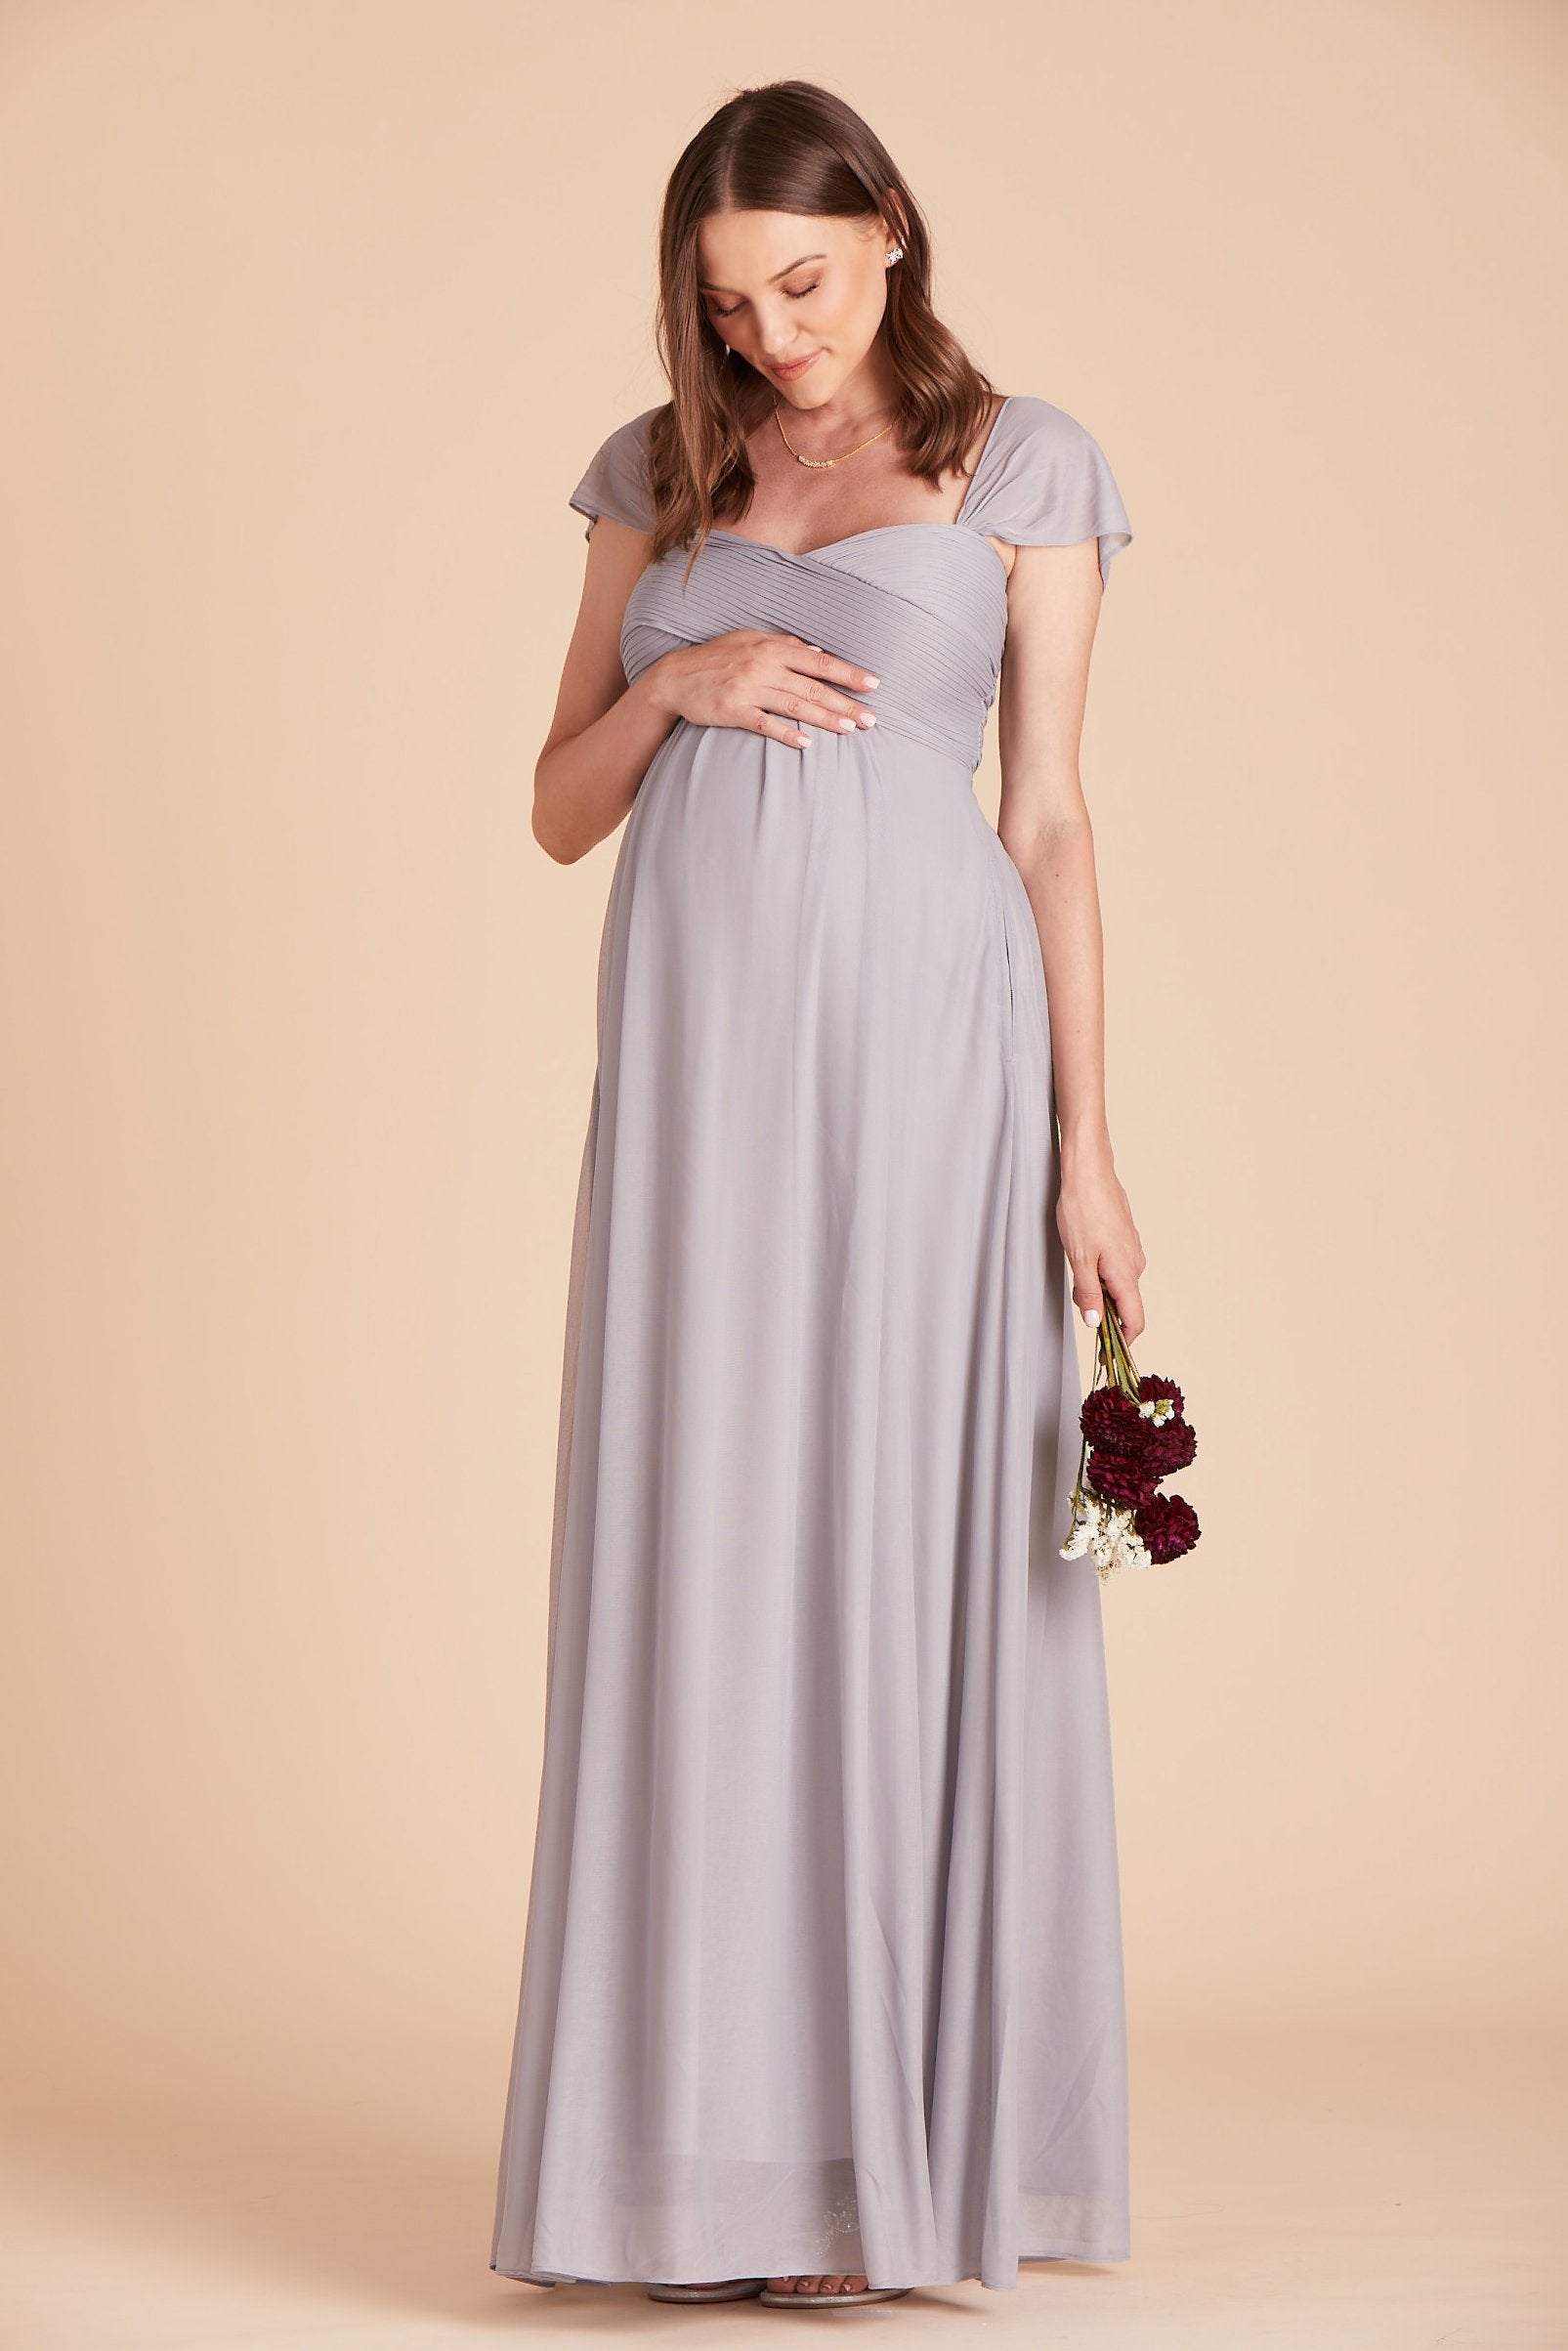 Maria convertible bridesmaids dress in silver mesh by Birdy Grey, front view